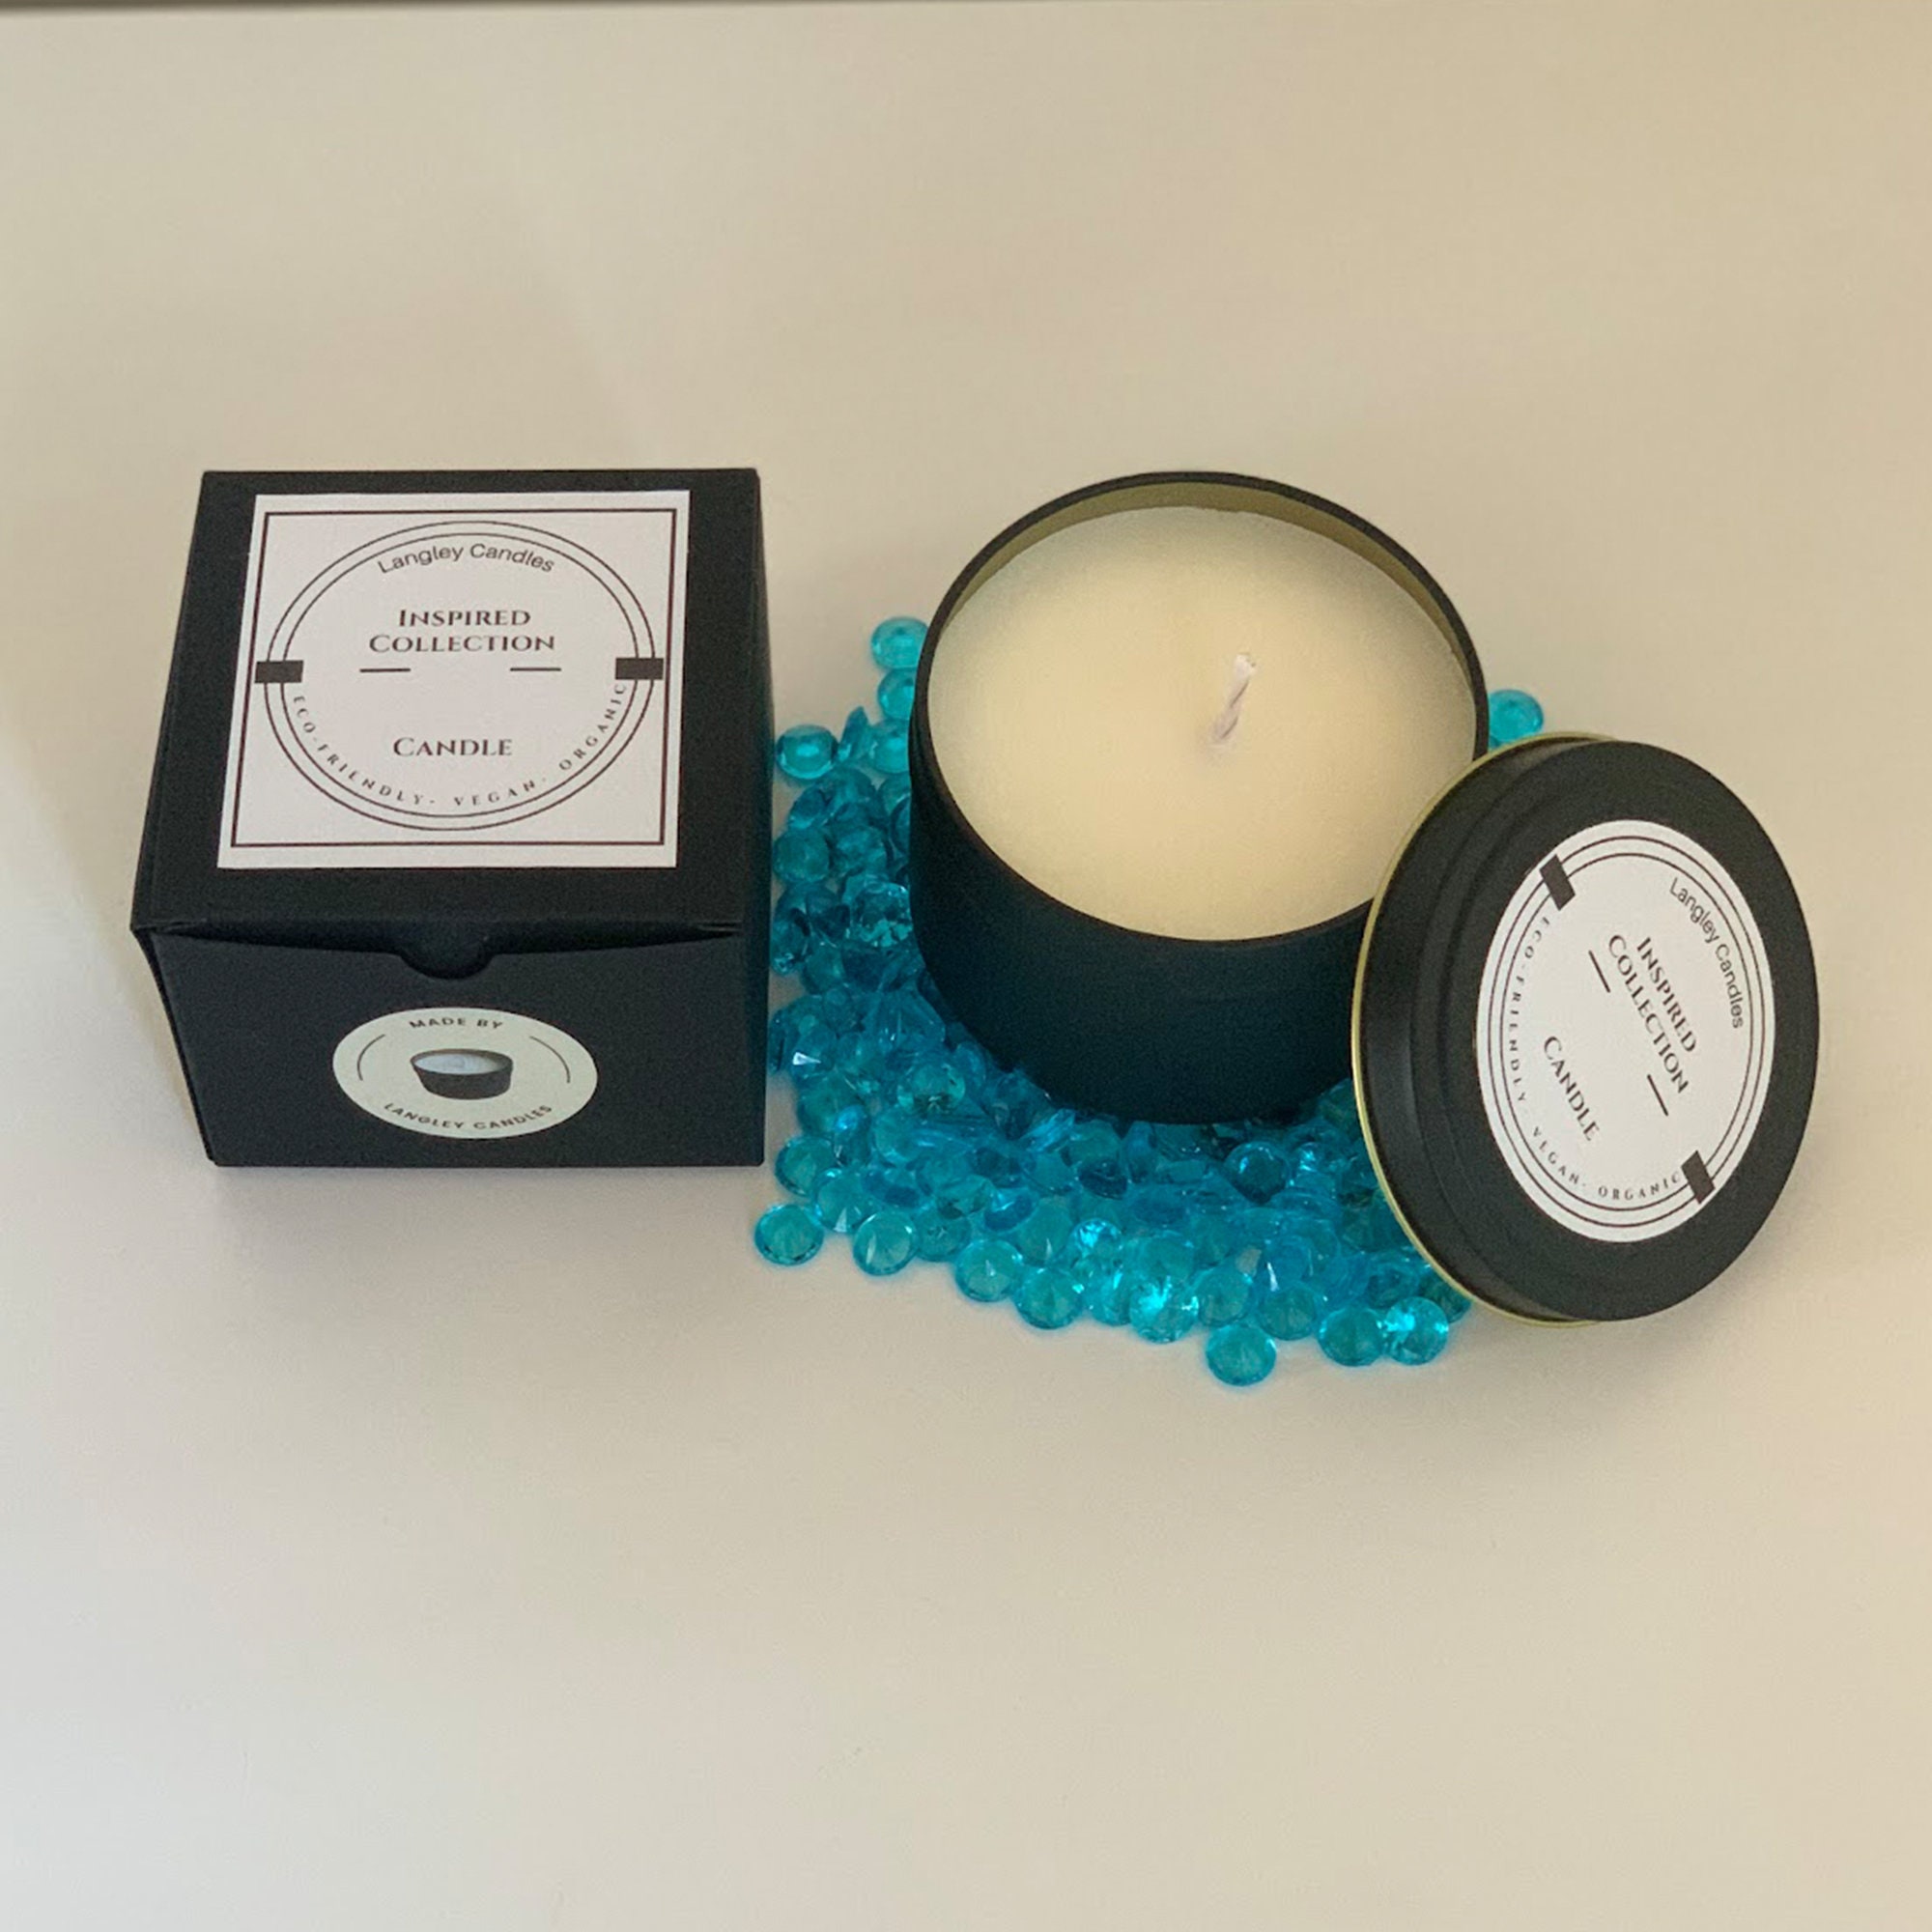 Buy Premium Scented Soy Wax Candle Designer Aftershave & Perfume